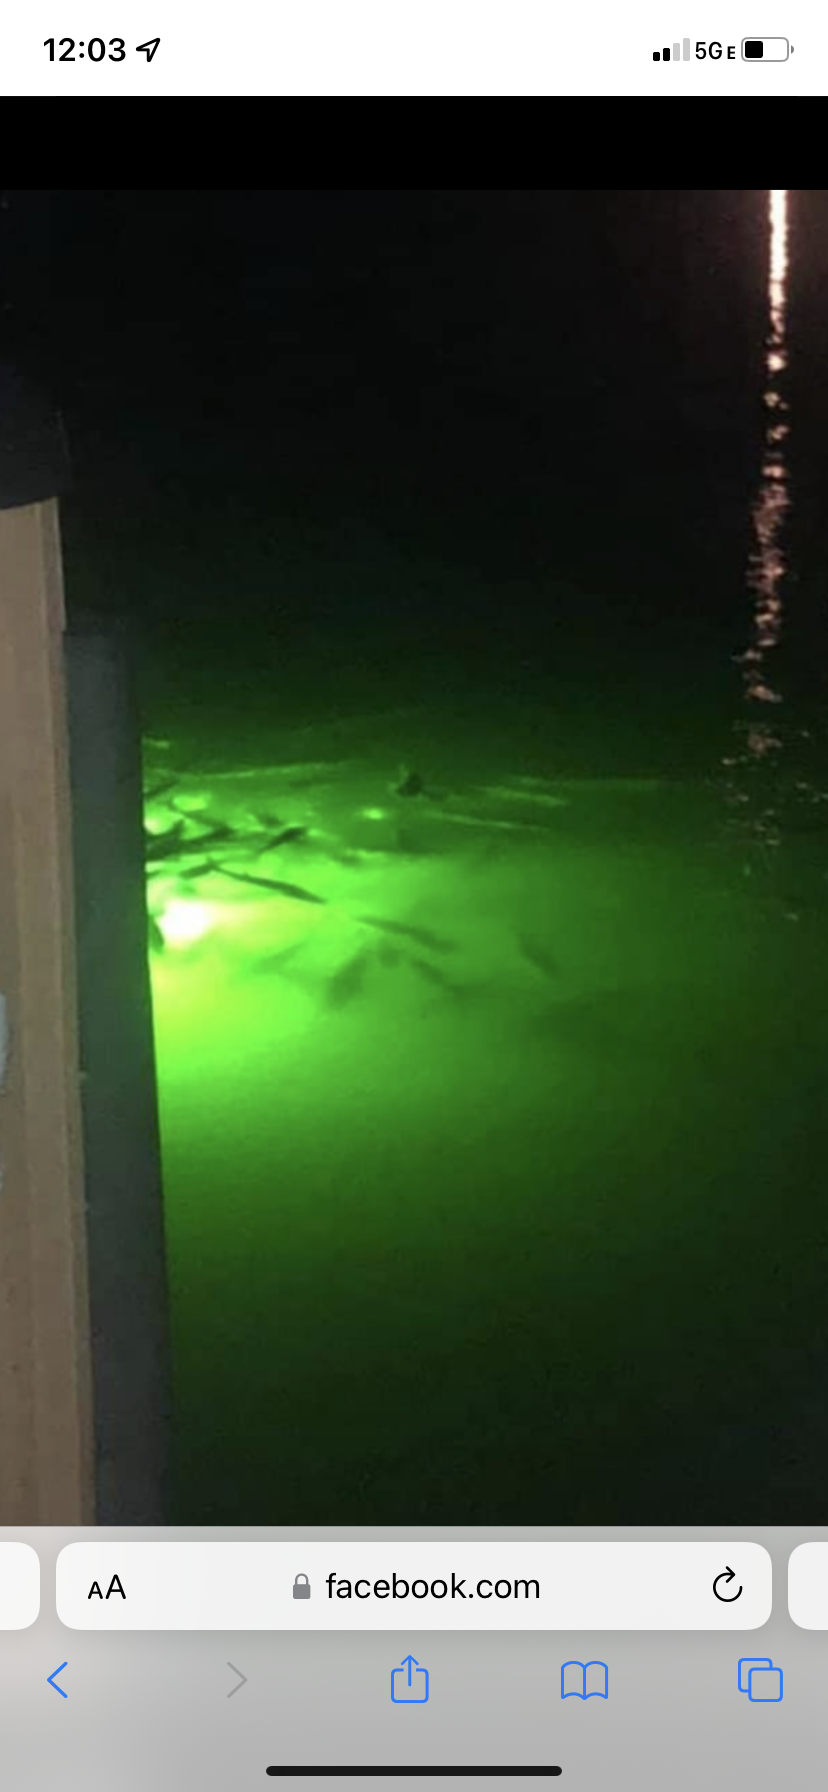 Where can I get one of these Big Green Led Dock lights? - The Hull